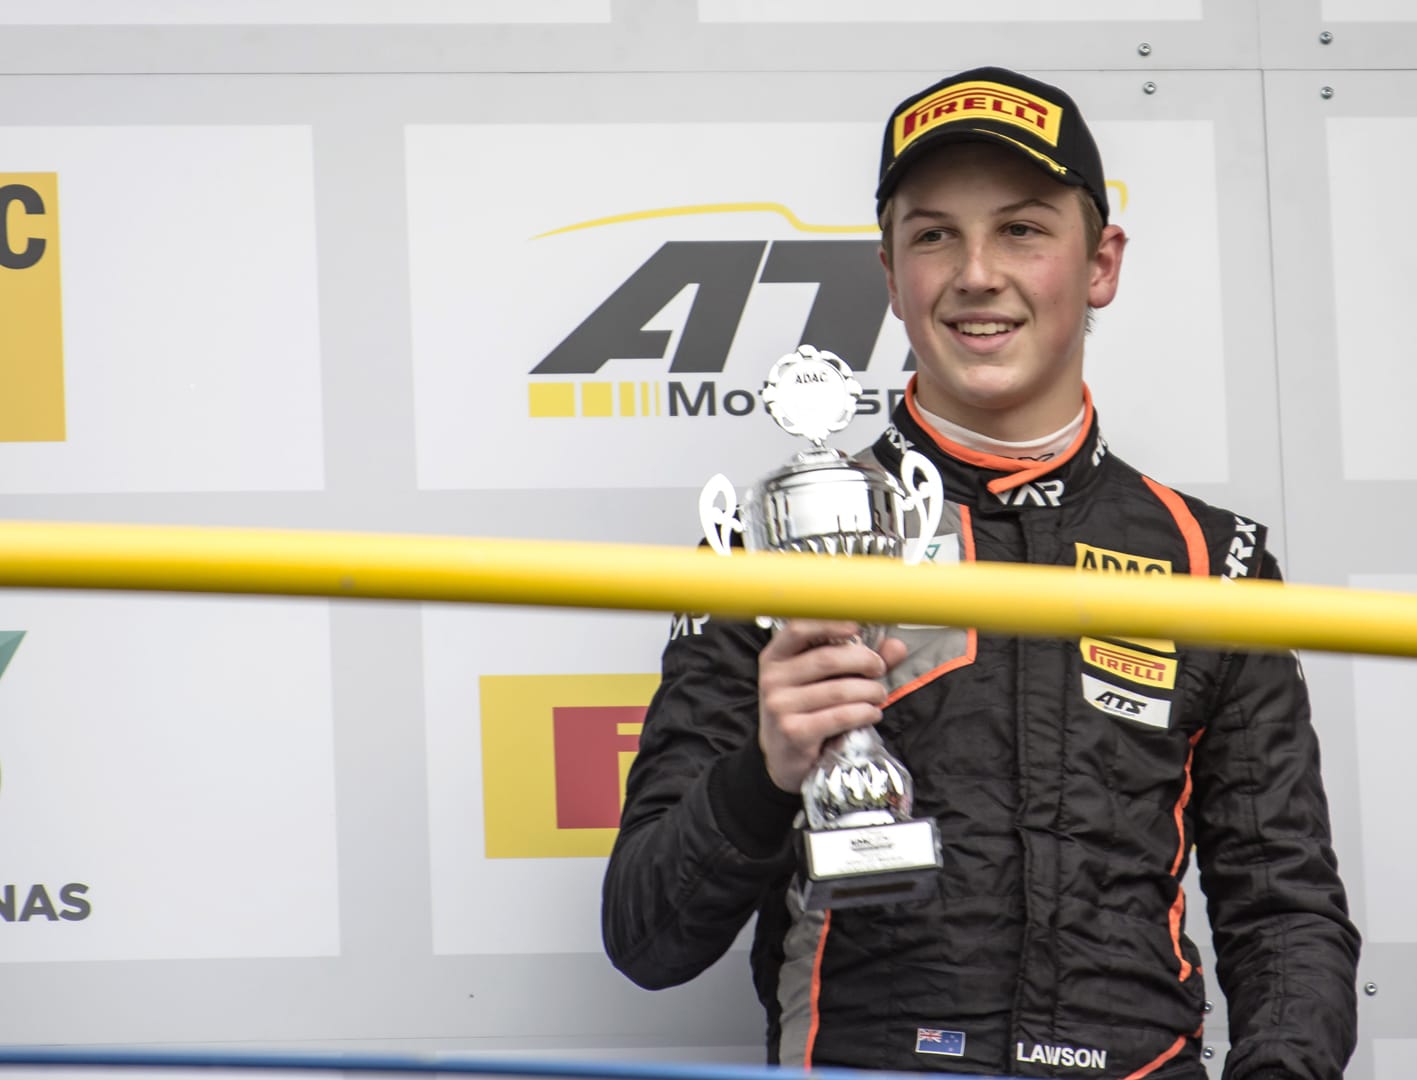 Podium on debut for Lawson